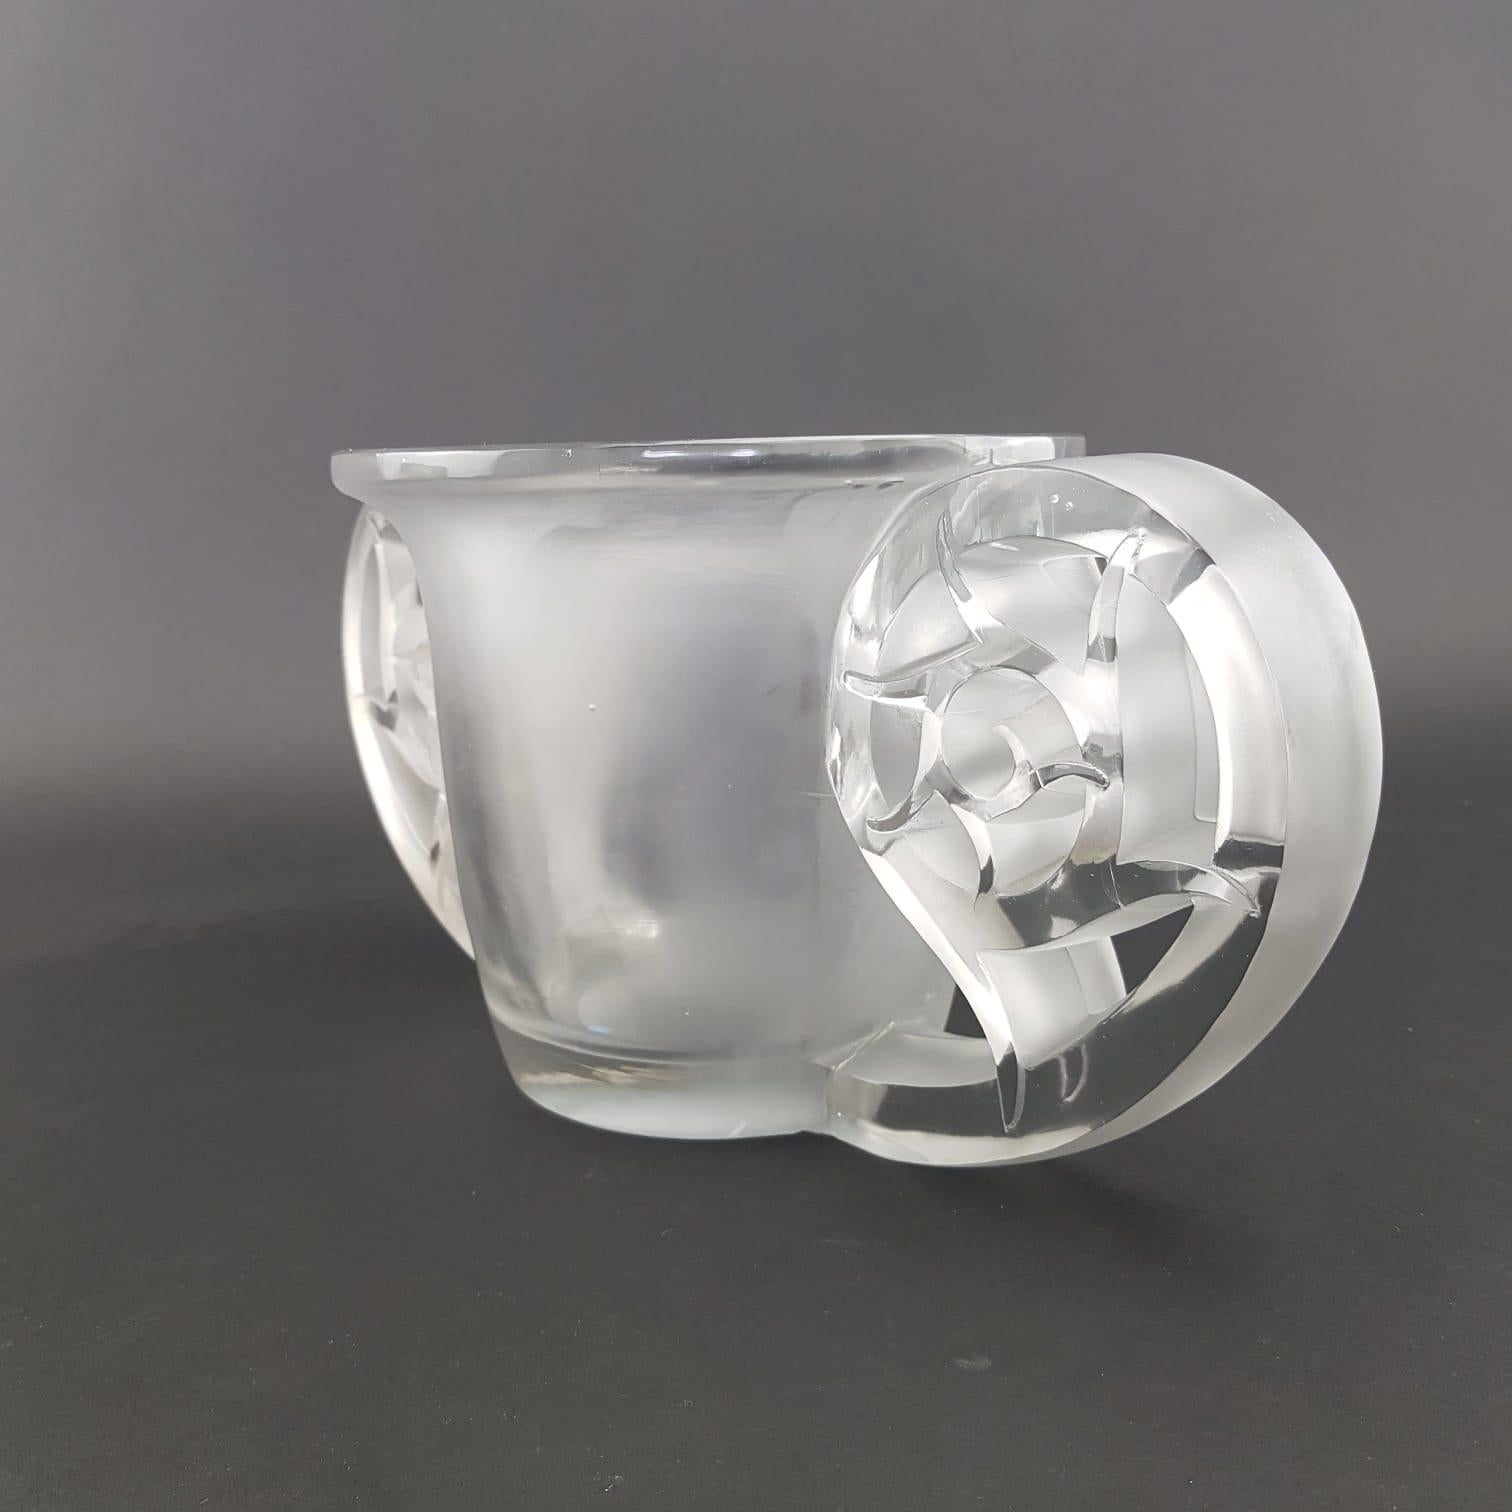 1926 Rene Lalique Pierrefonds Vase in Clear and Acid Satin Finish Glass ...